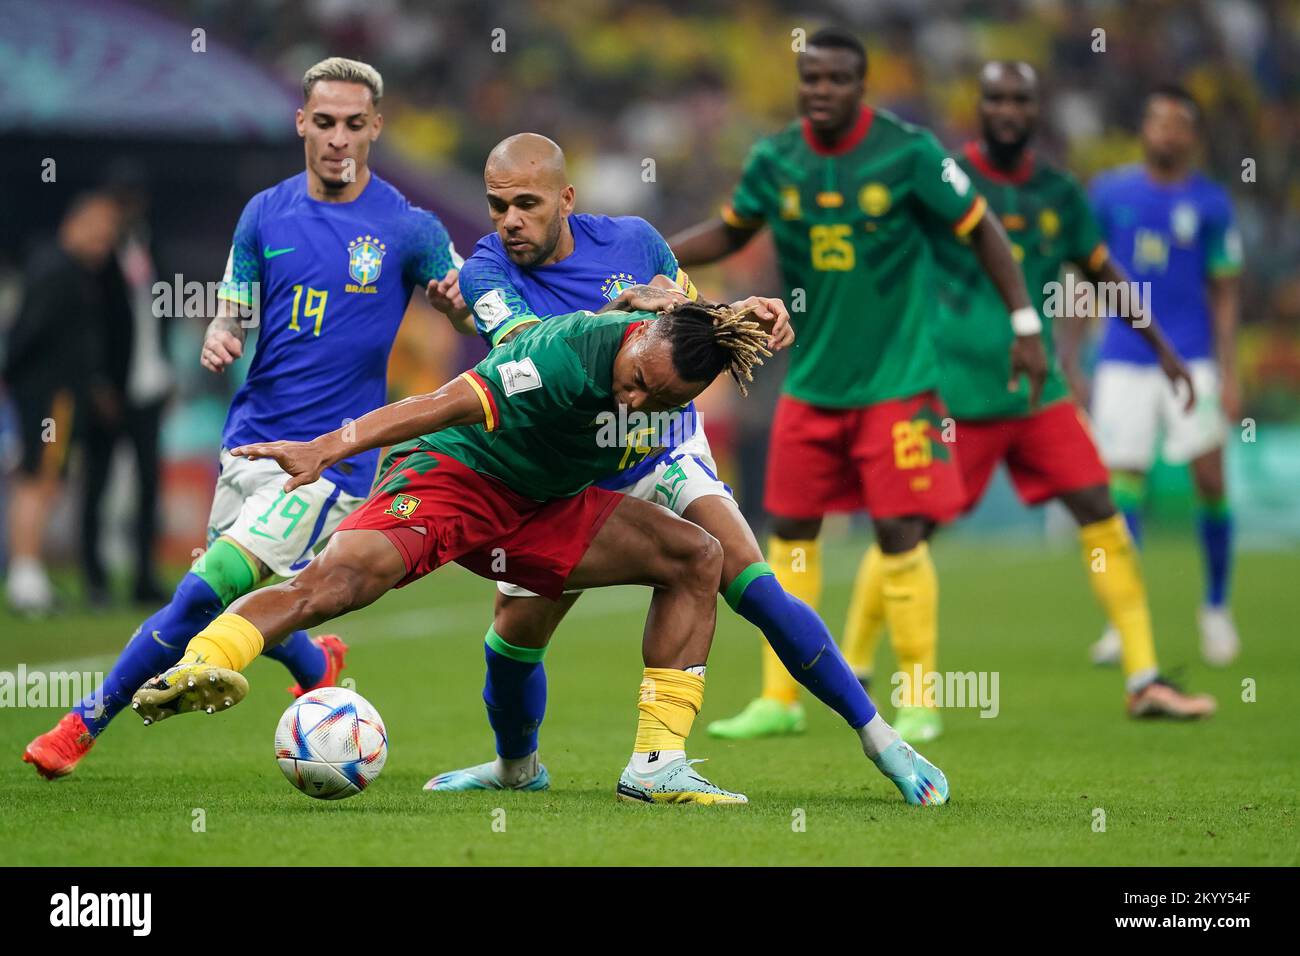 Lusail, Qatar. 02nd Dec, 2022. Lusail Stadium LUSAIL, QATAR - DECEMBER 2: Player of Brazil Dani Alves fights for the ball with player of Cameroon Pierre Kunde during the FIFA World Cup Qatar 2022 group G match between Brazil and Cameroon at Lusail Stadium on December 2, 2022 in Lusail, Qatar. (Photo by Florencia Tan Jun/PxImages) (Florencia Tan Jun/SPP) Credit: SPP Sport Press Photo. /Alamy Live News Stock Photo